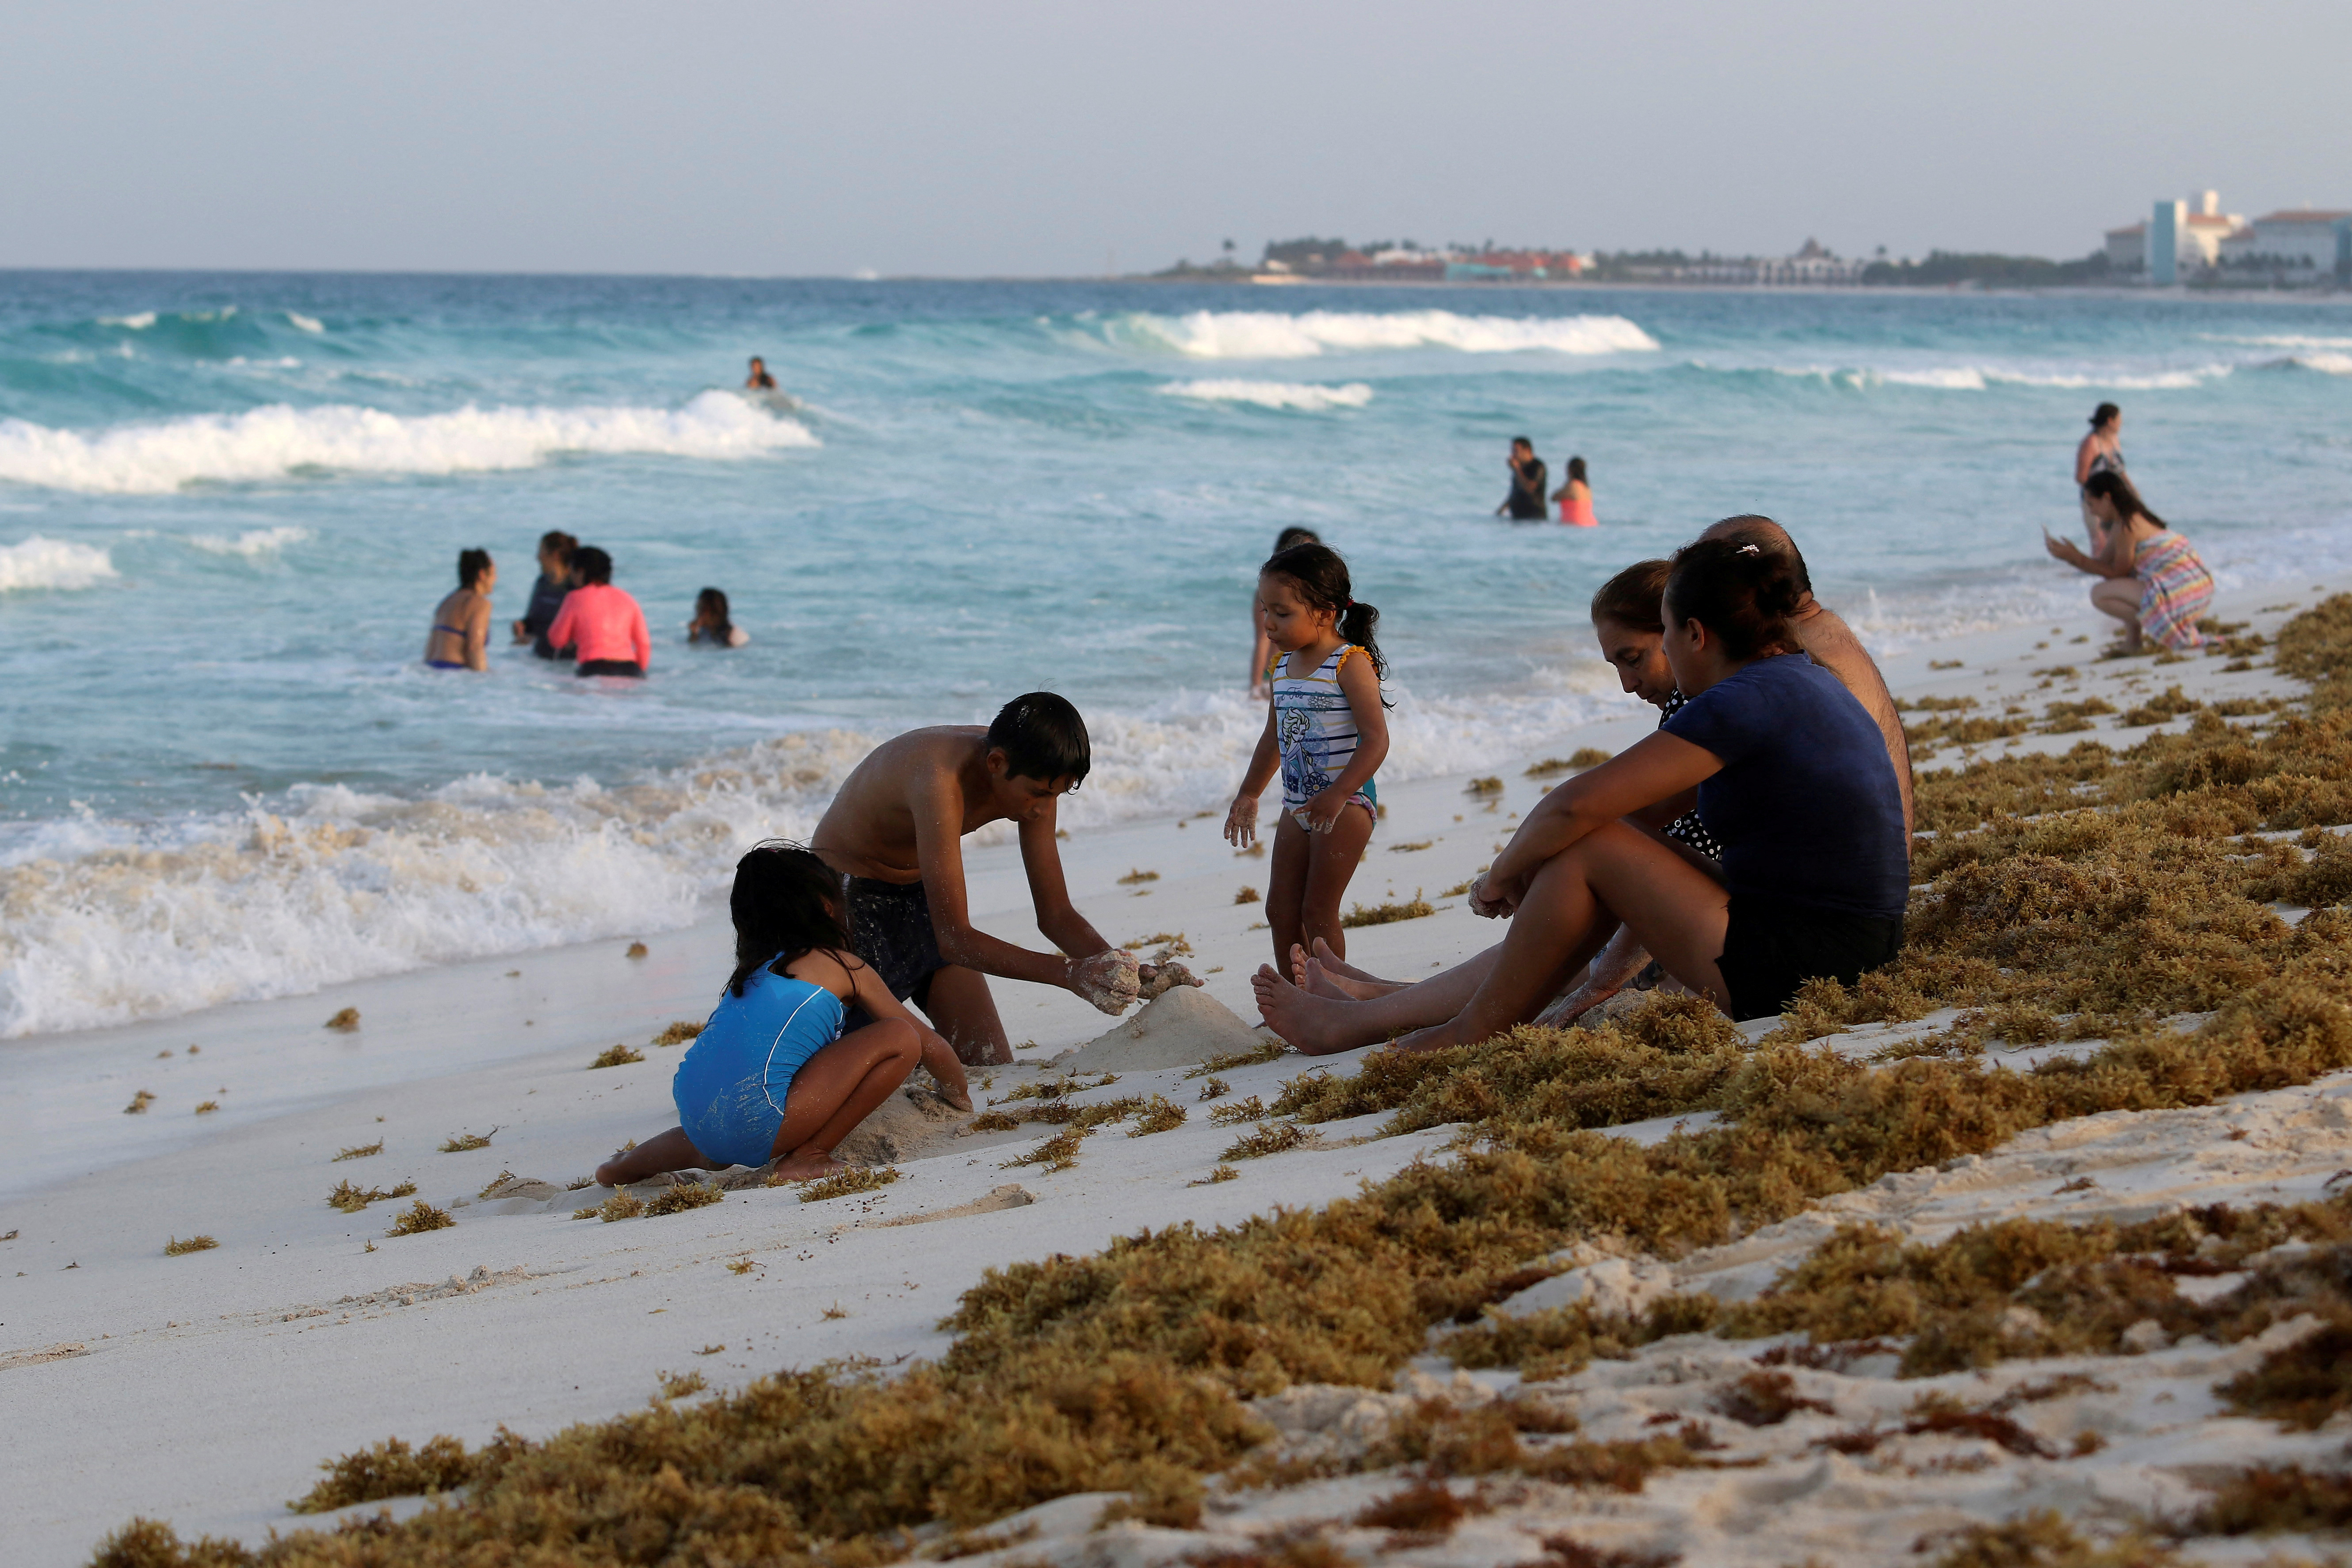 Tourists are seen on a beach covered with seaweed in Cancun